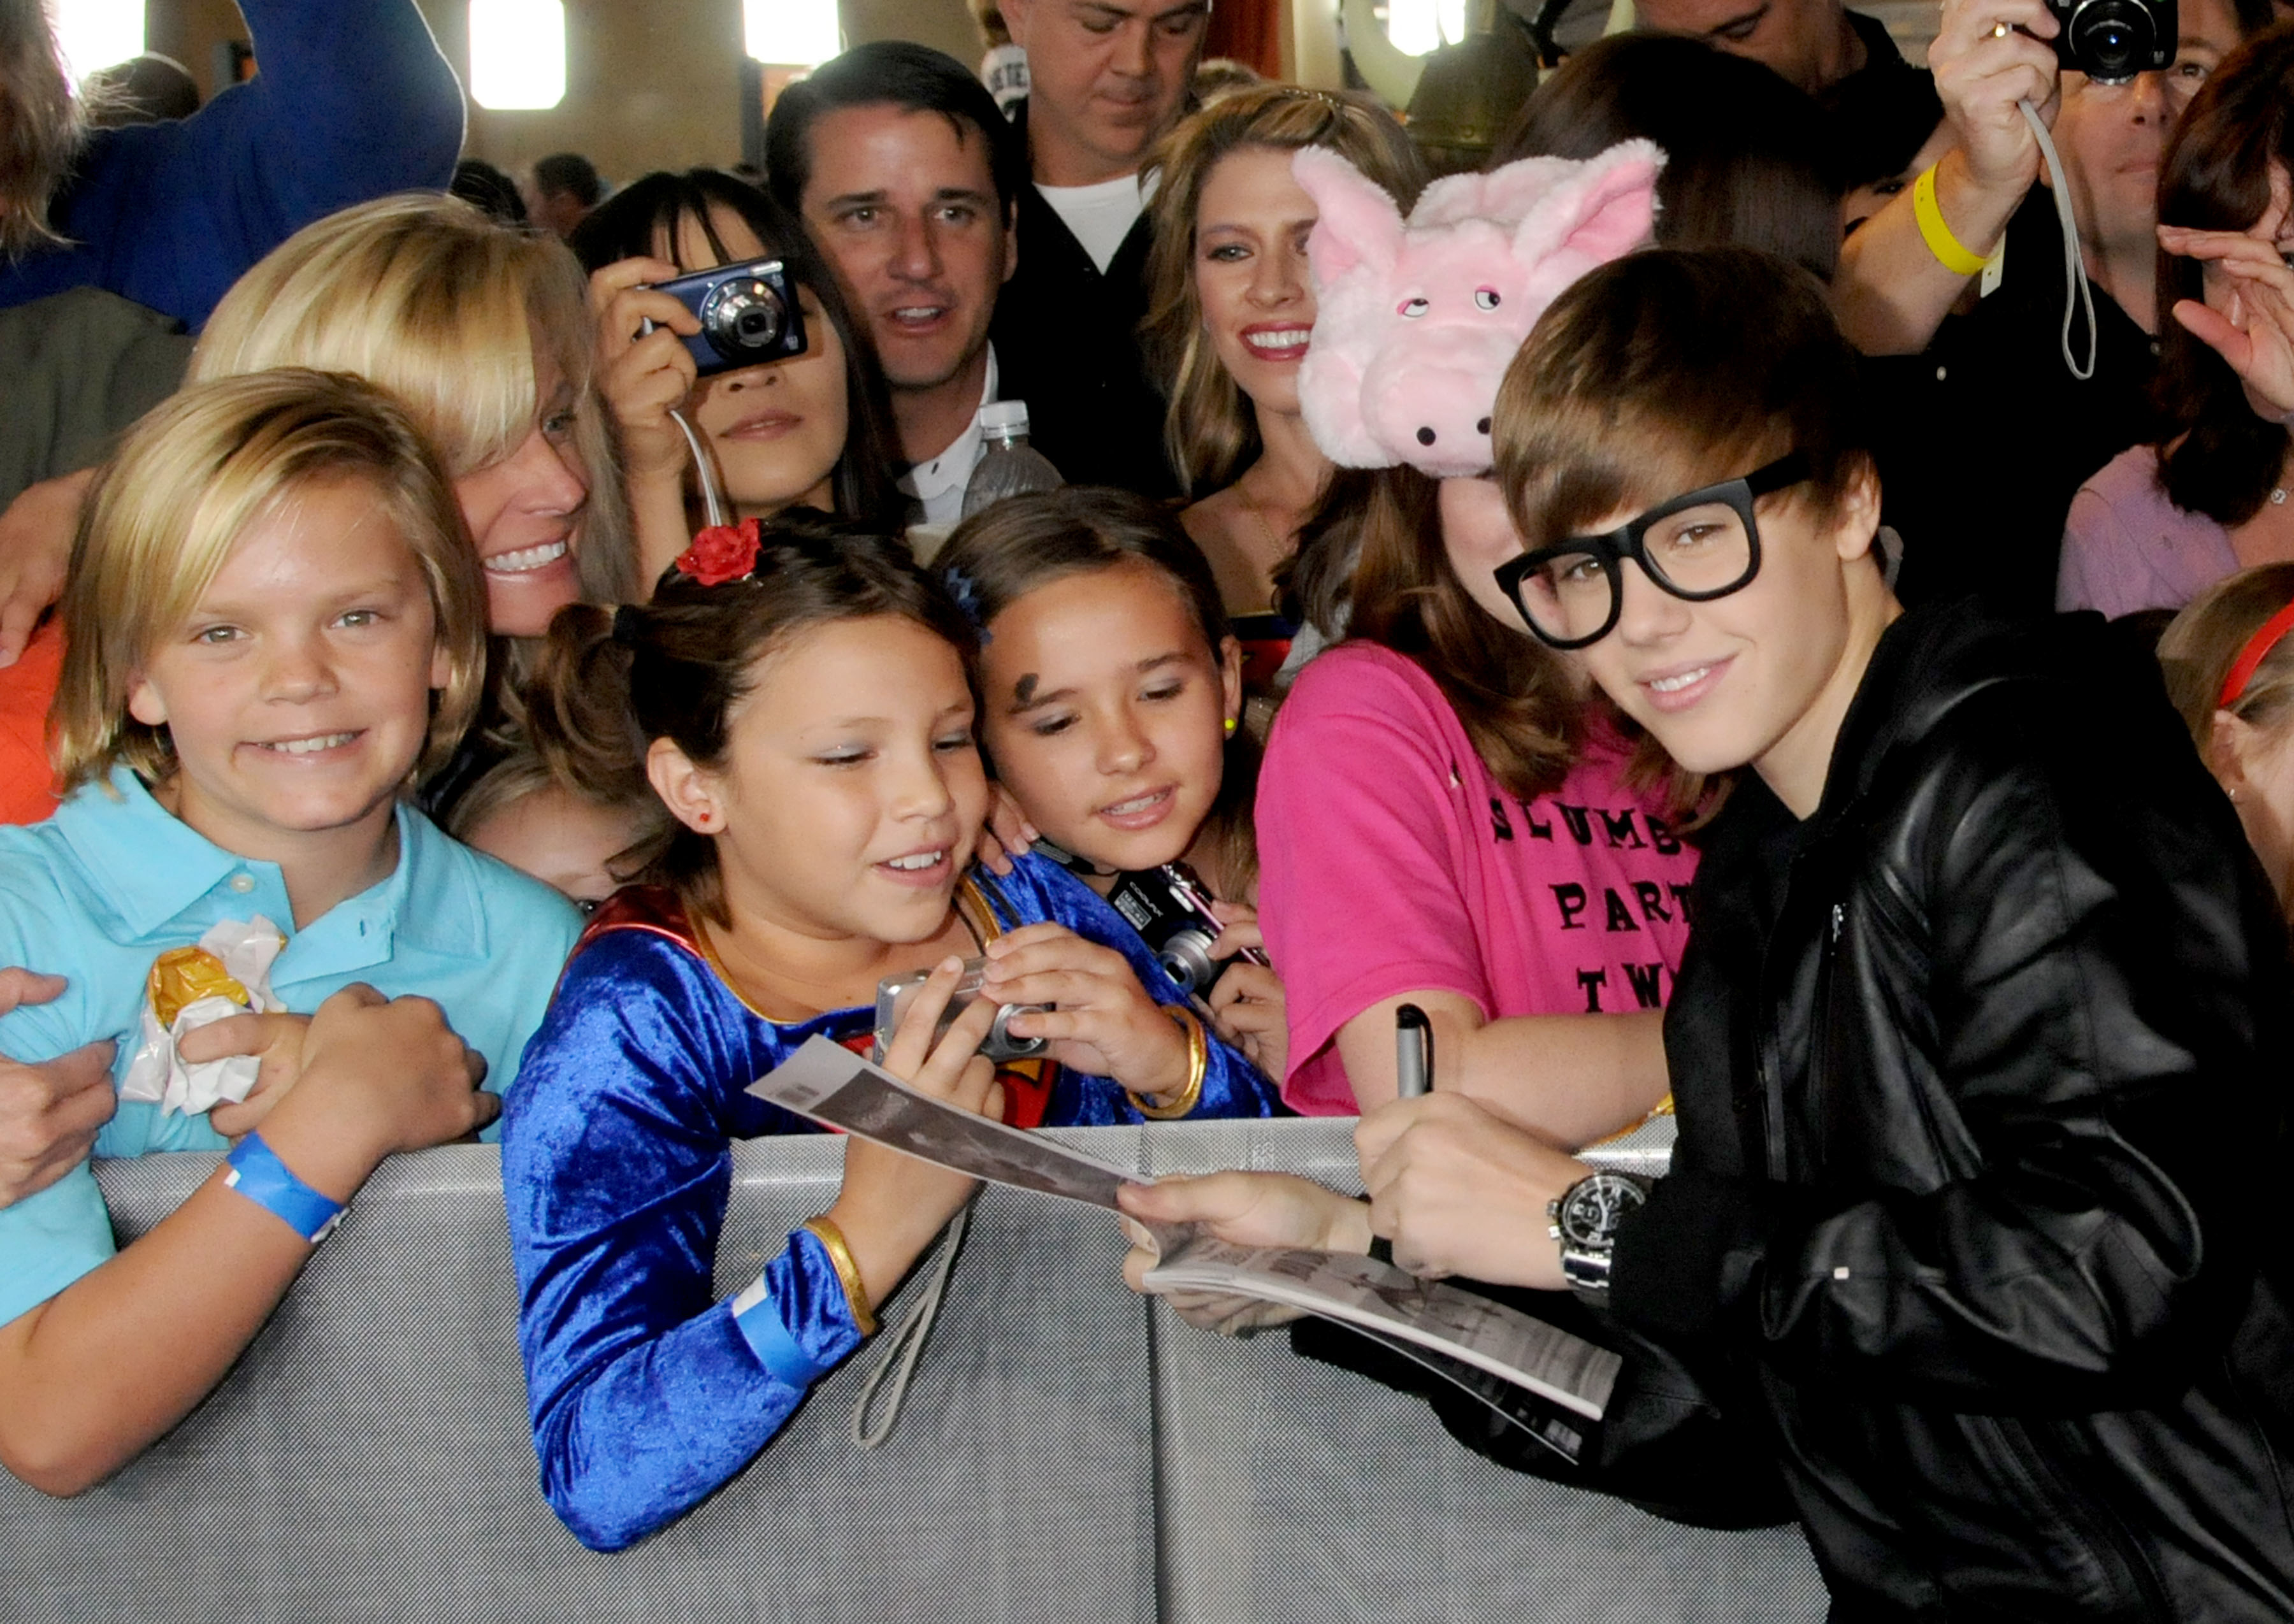 Close-up of Justin as a teen signing autographs for fans